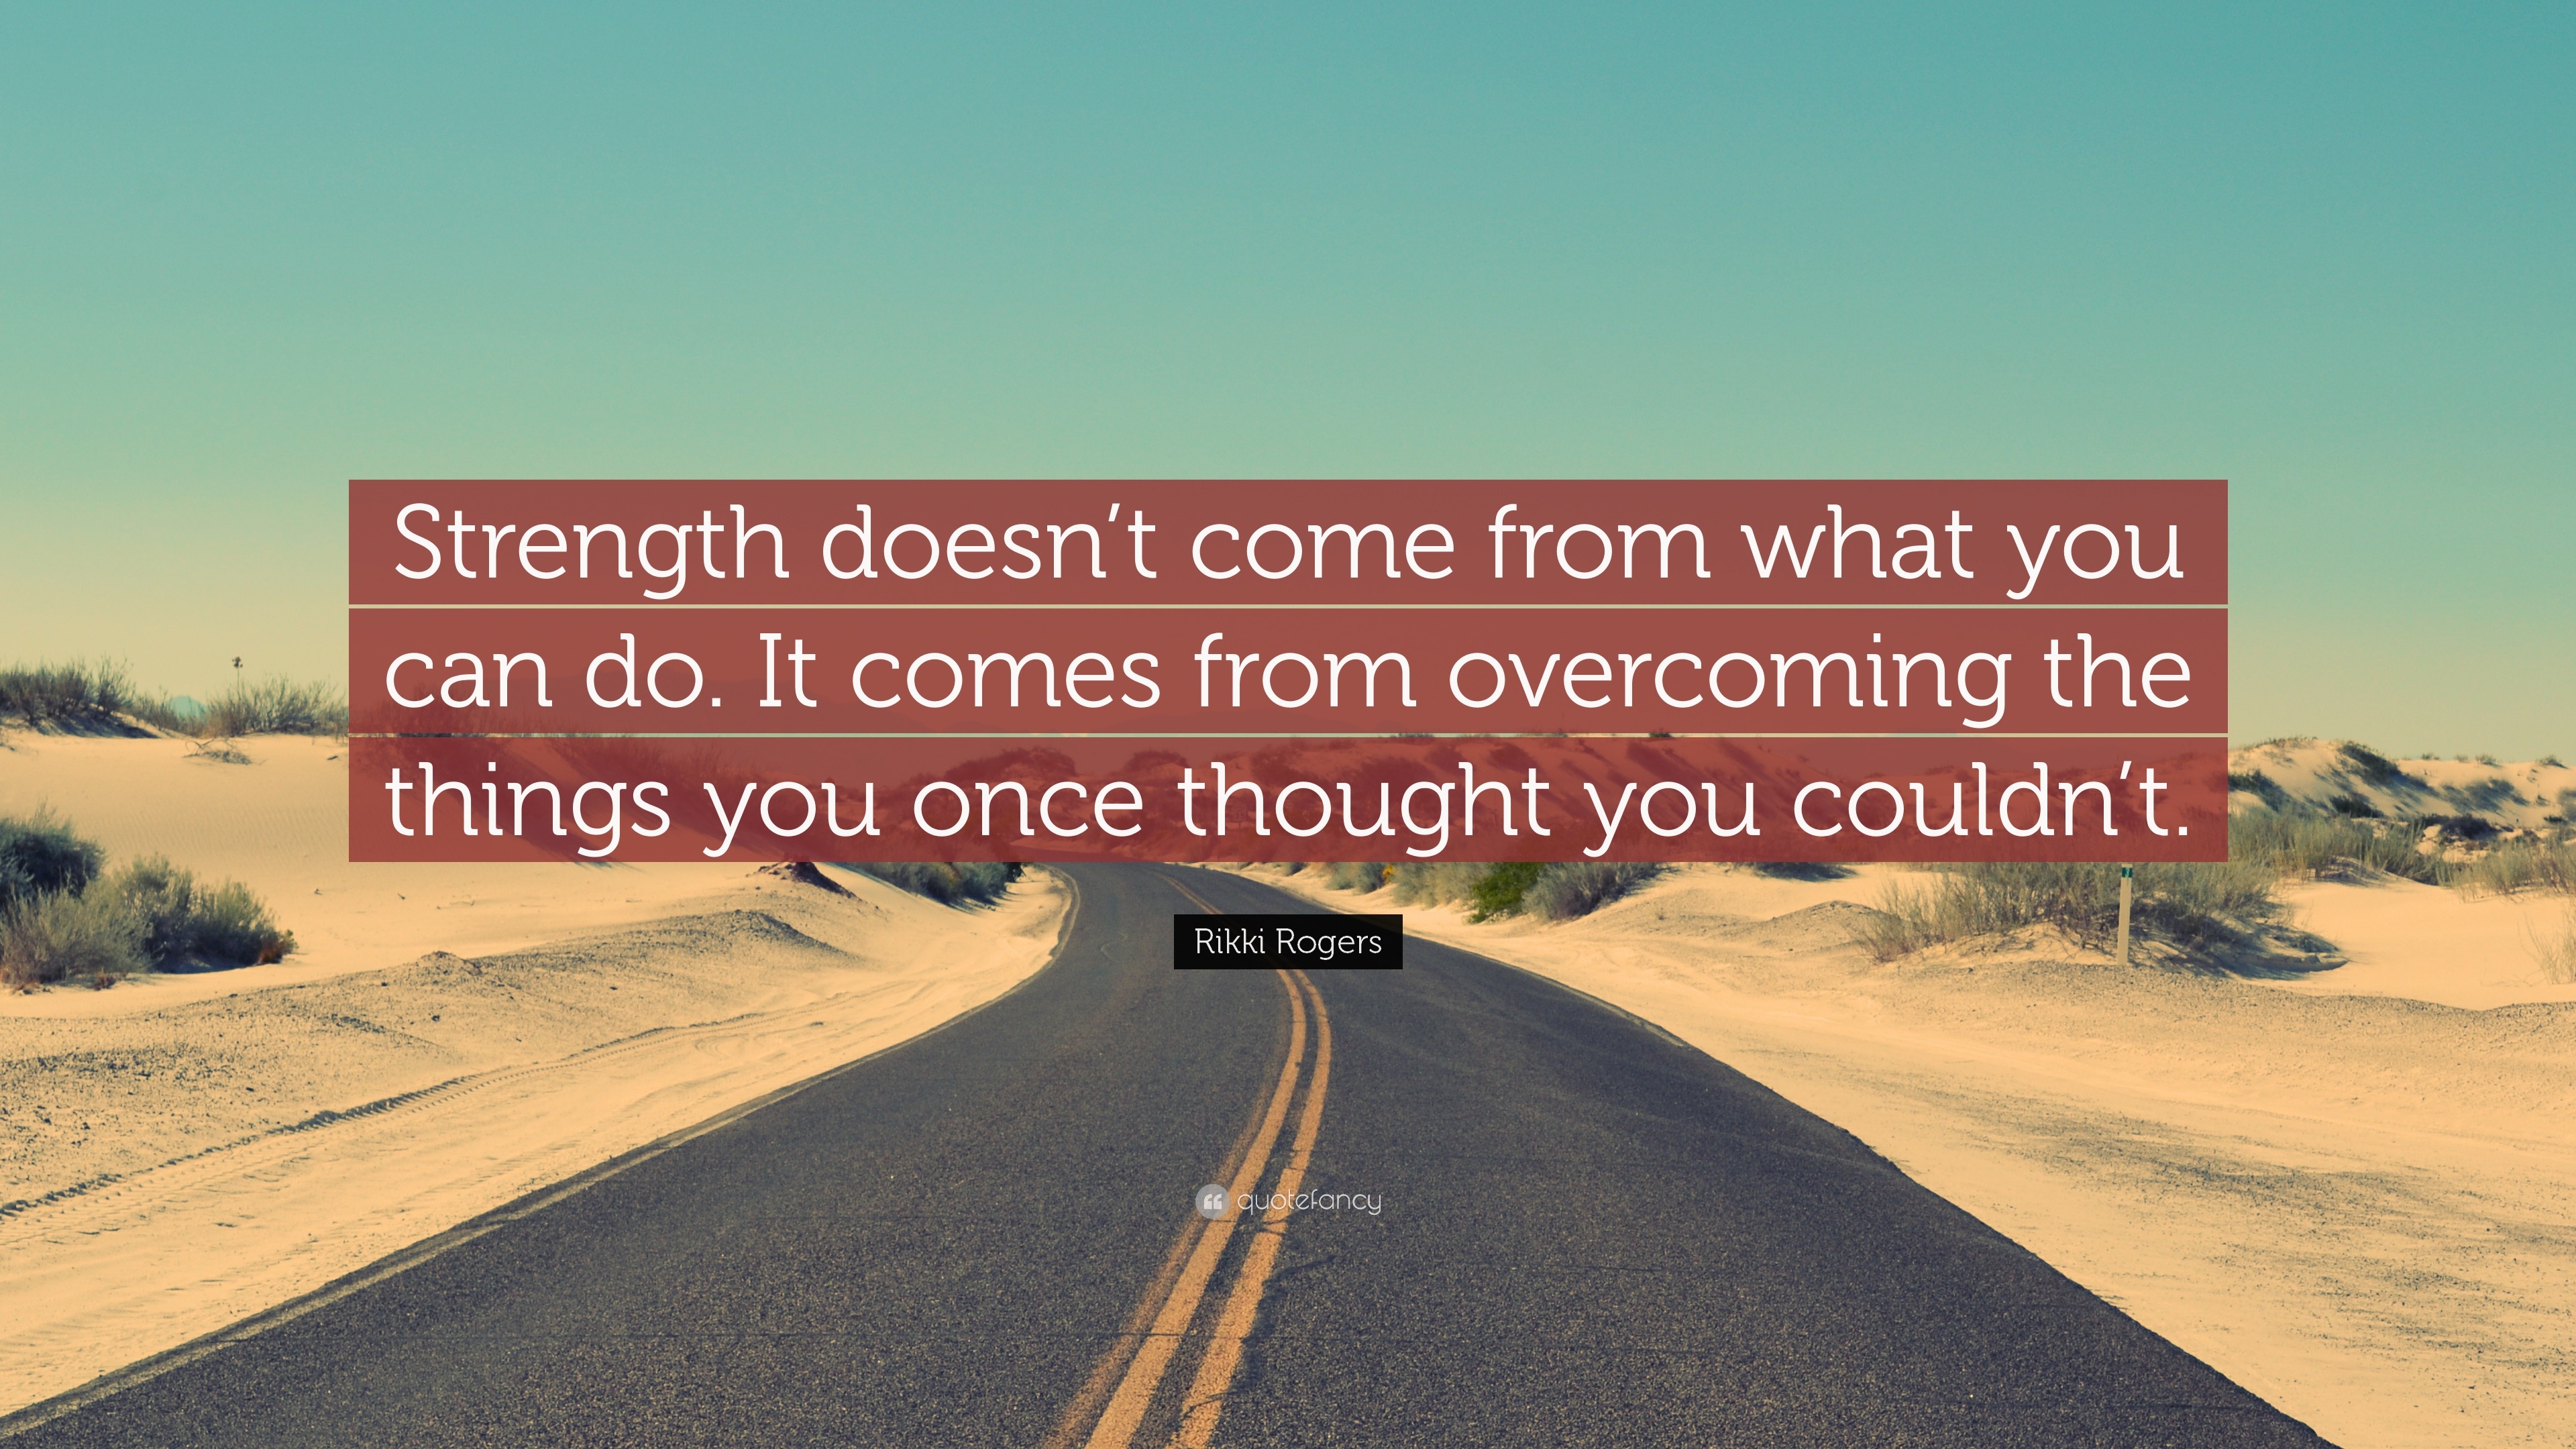 Rikki Rogers Quote: “Strength doesn’t come from what you can do. It